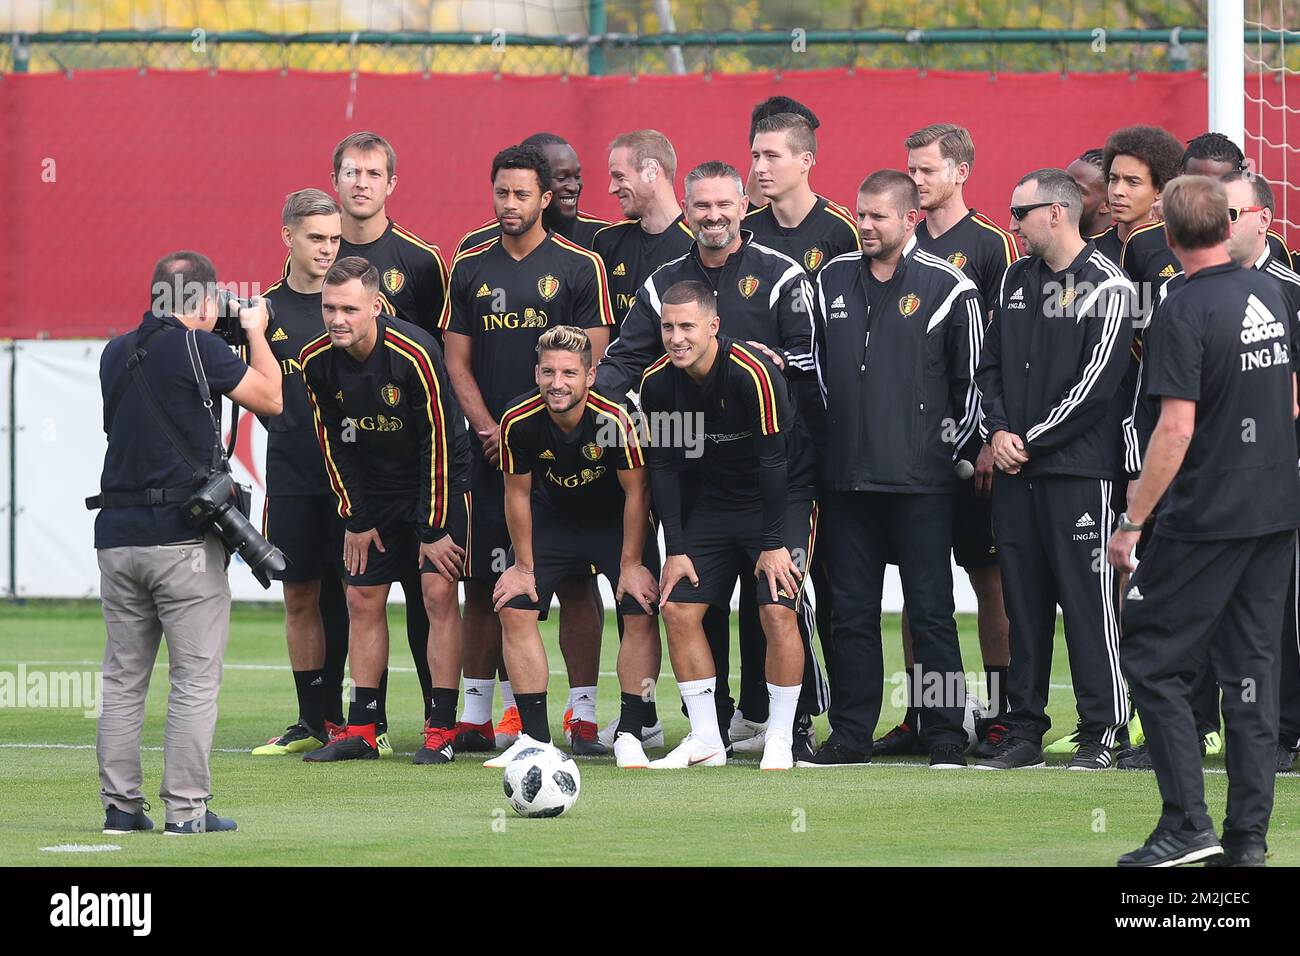 Belgium's players pose for the photographer with the Blind Devils team ahead of a training session of Belgian national soccer team the Red Devils in Tubize, Tuesday 04 September 2018. The team is preparing for a friendly match against Scotland on 07 September and the UEFA Nations League match against Iceland on 11 September. BELGA PHOTO BRUNO FAHY Stock Photo